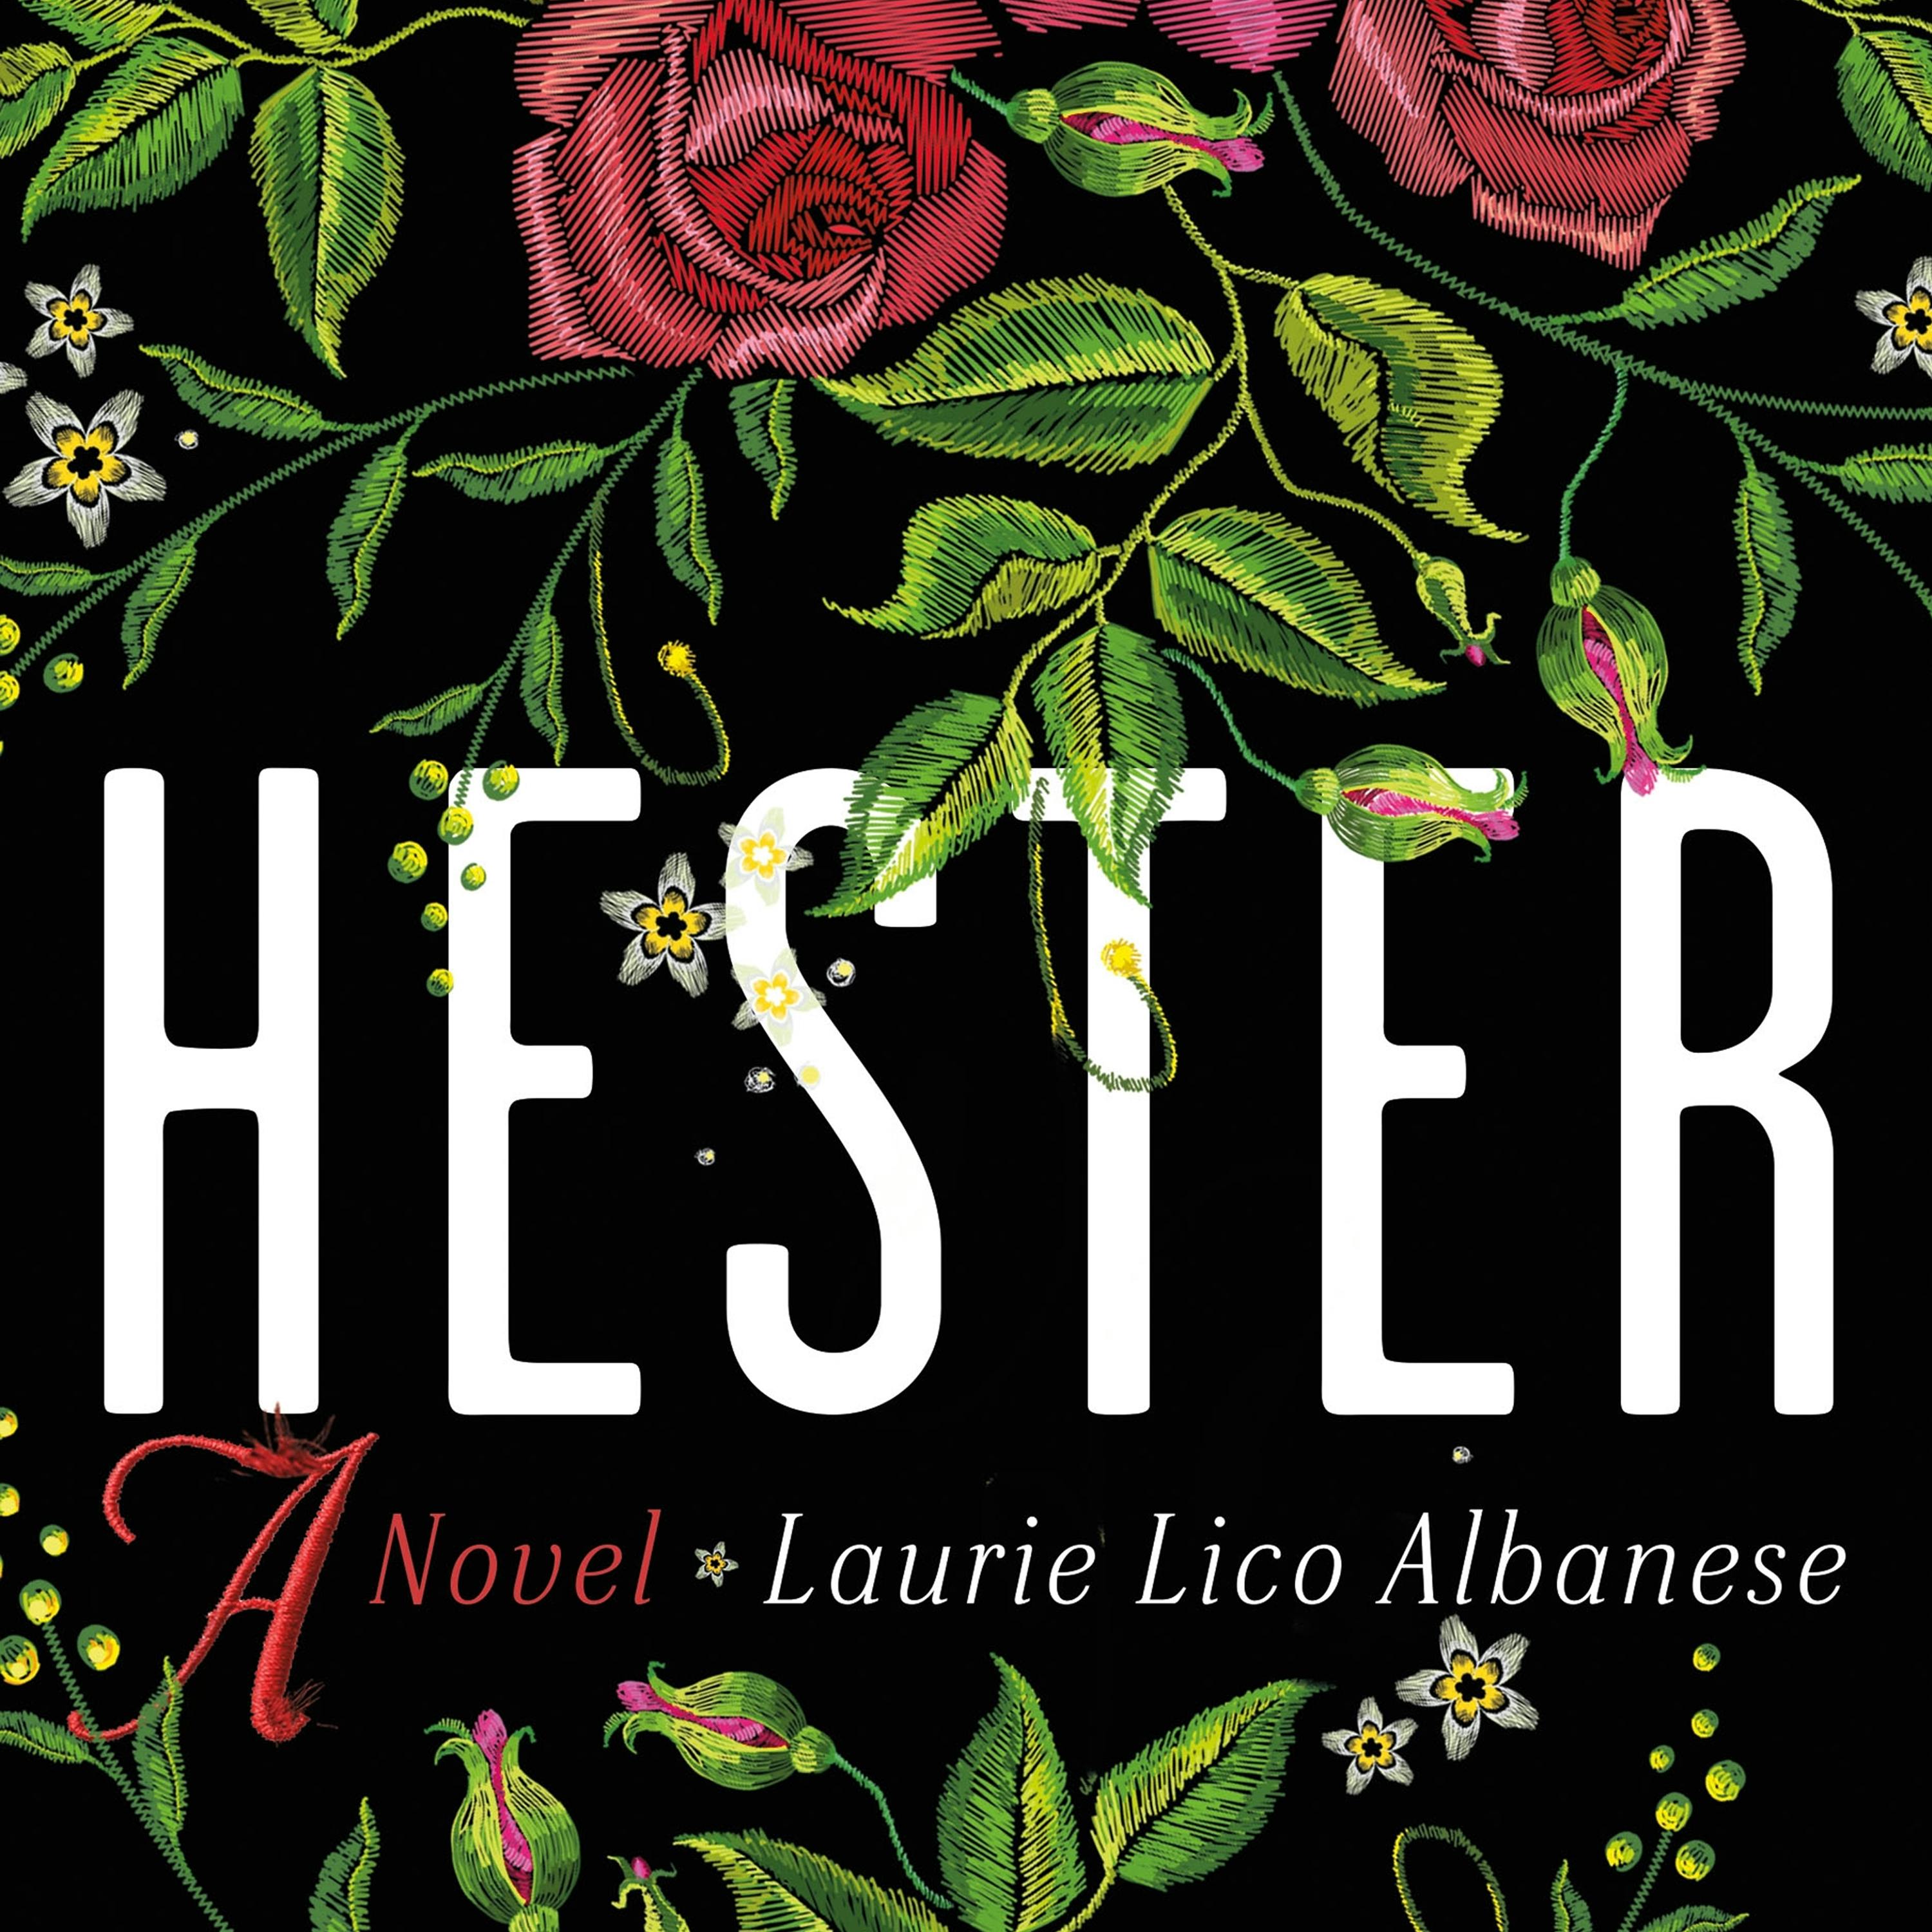 who did hester prynne have an affair with